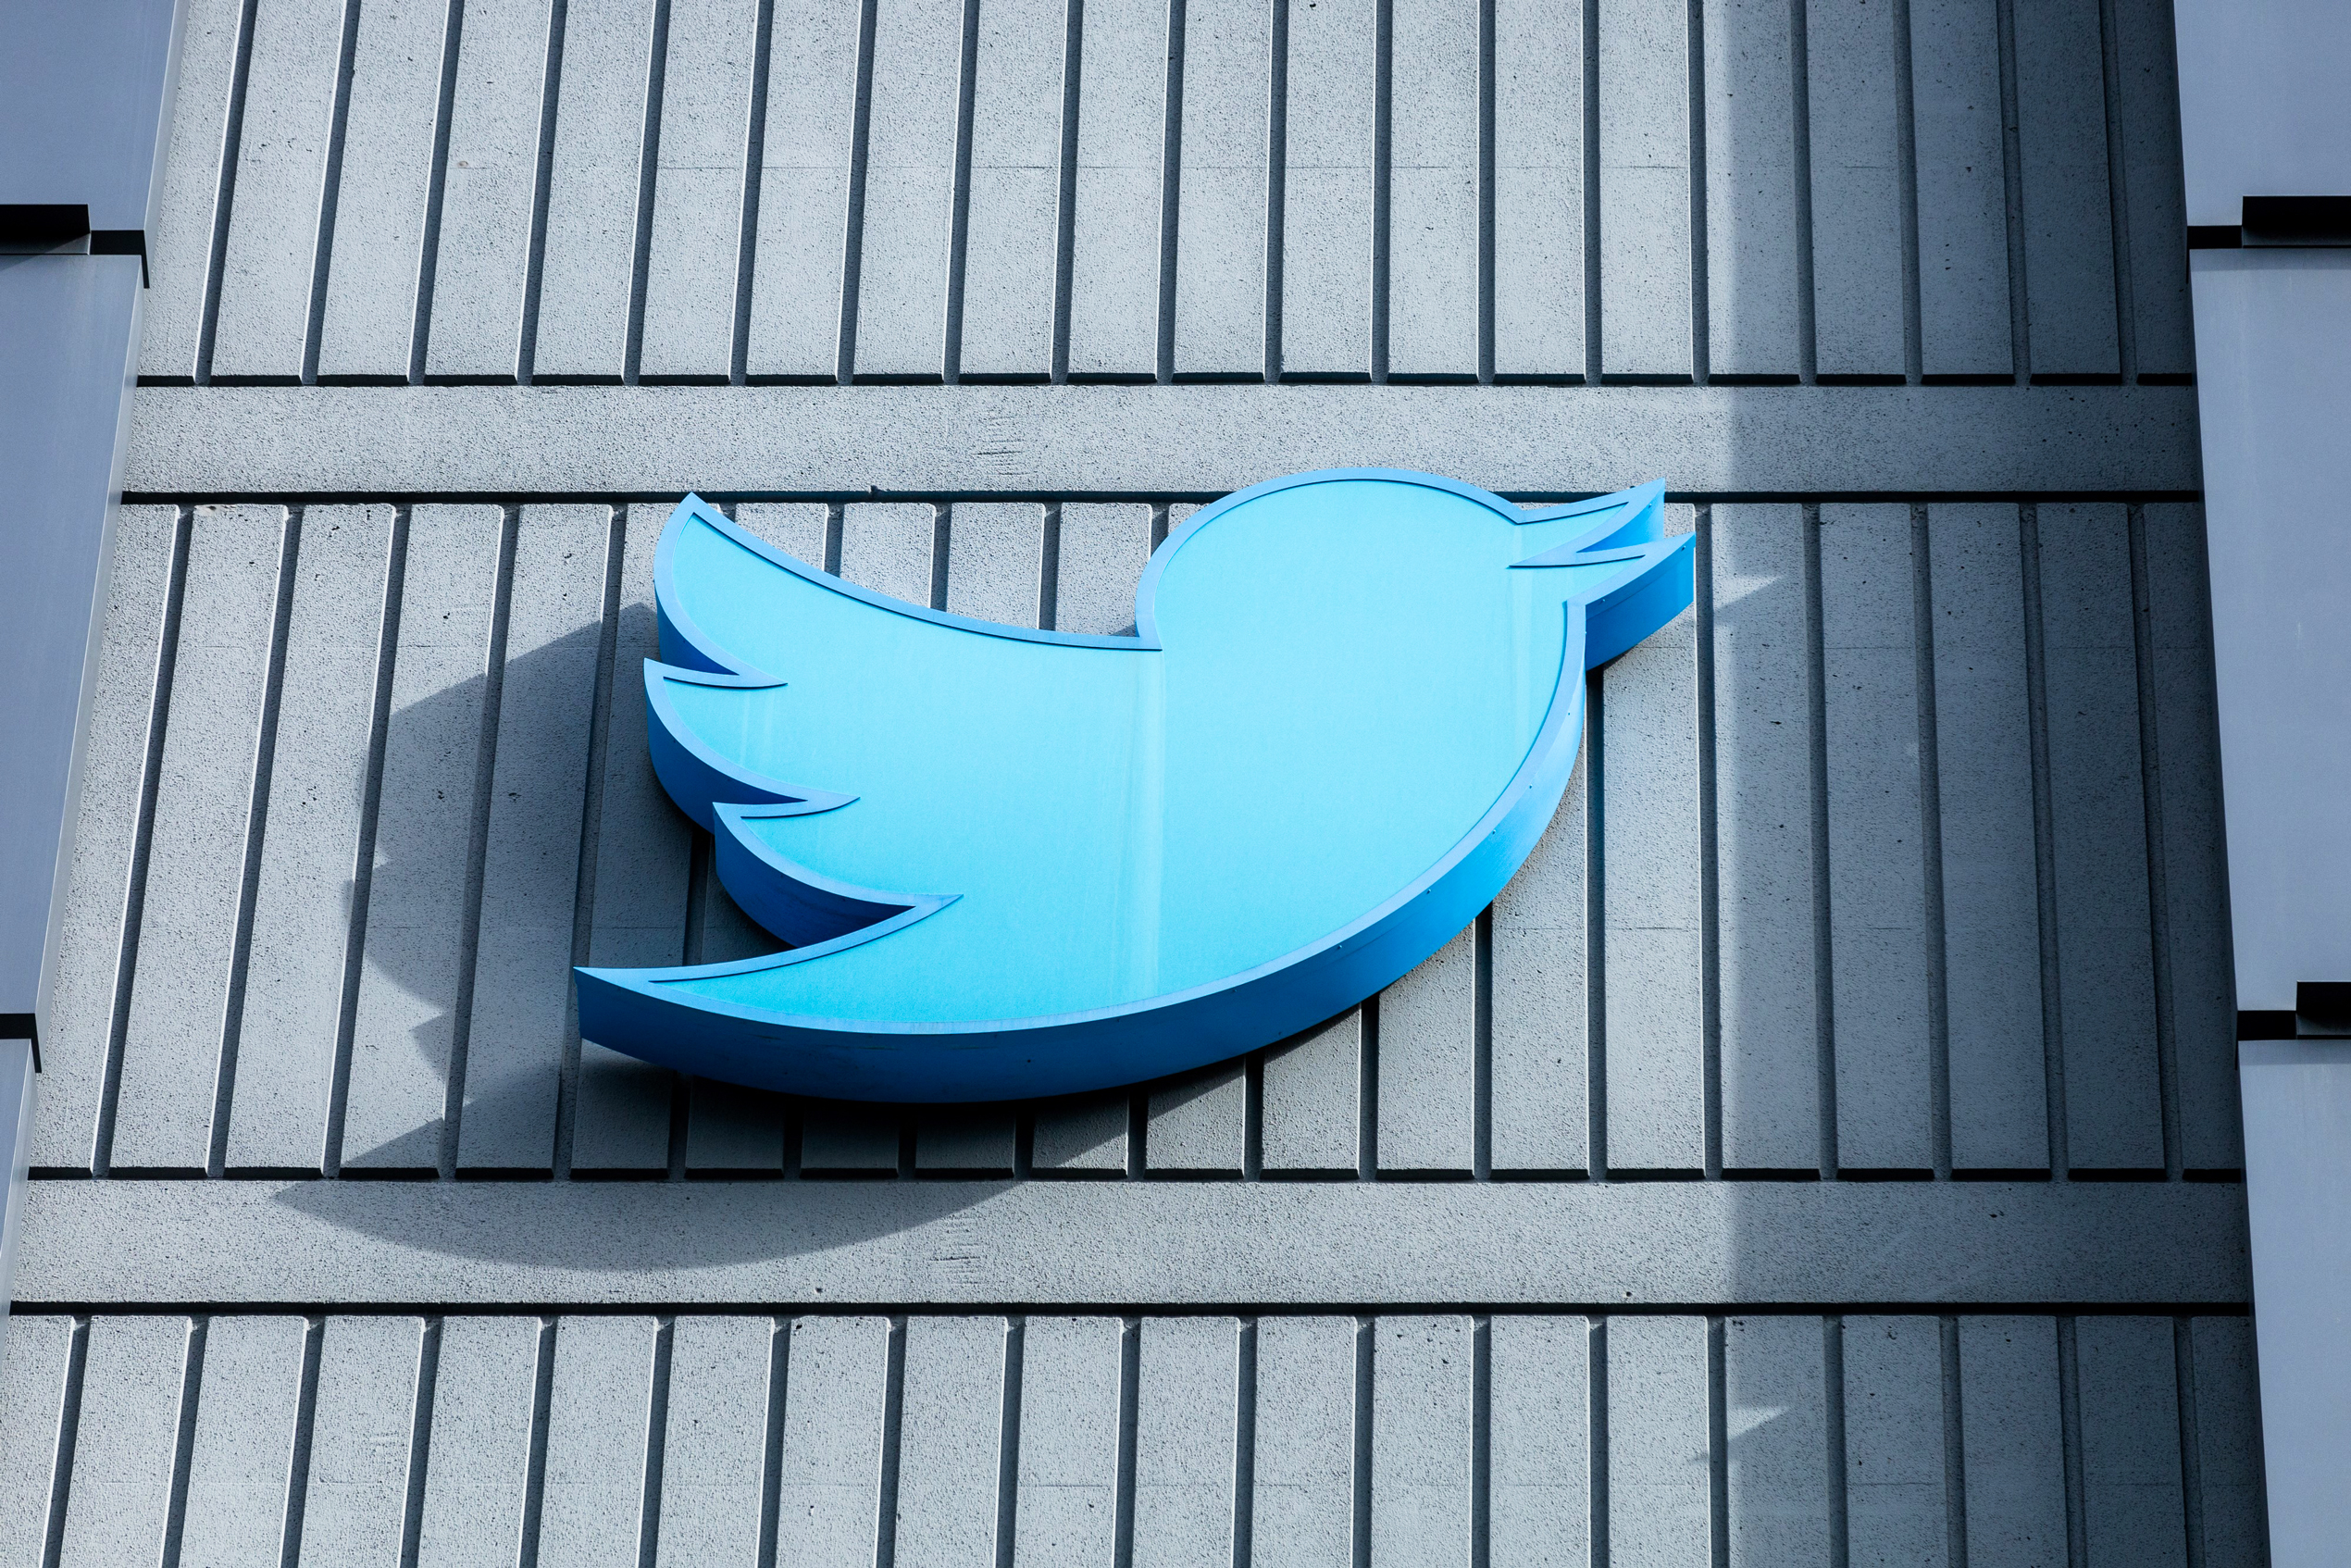 Twitter sends users thousands of dollars in surprising ad revenue payouts